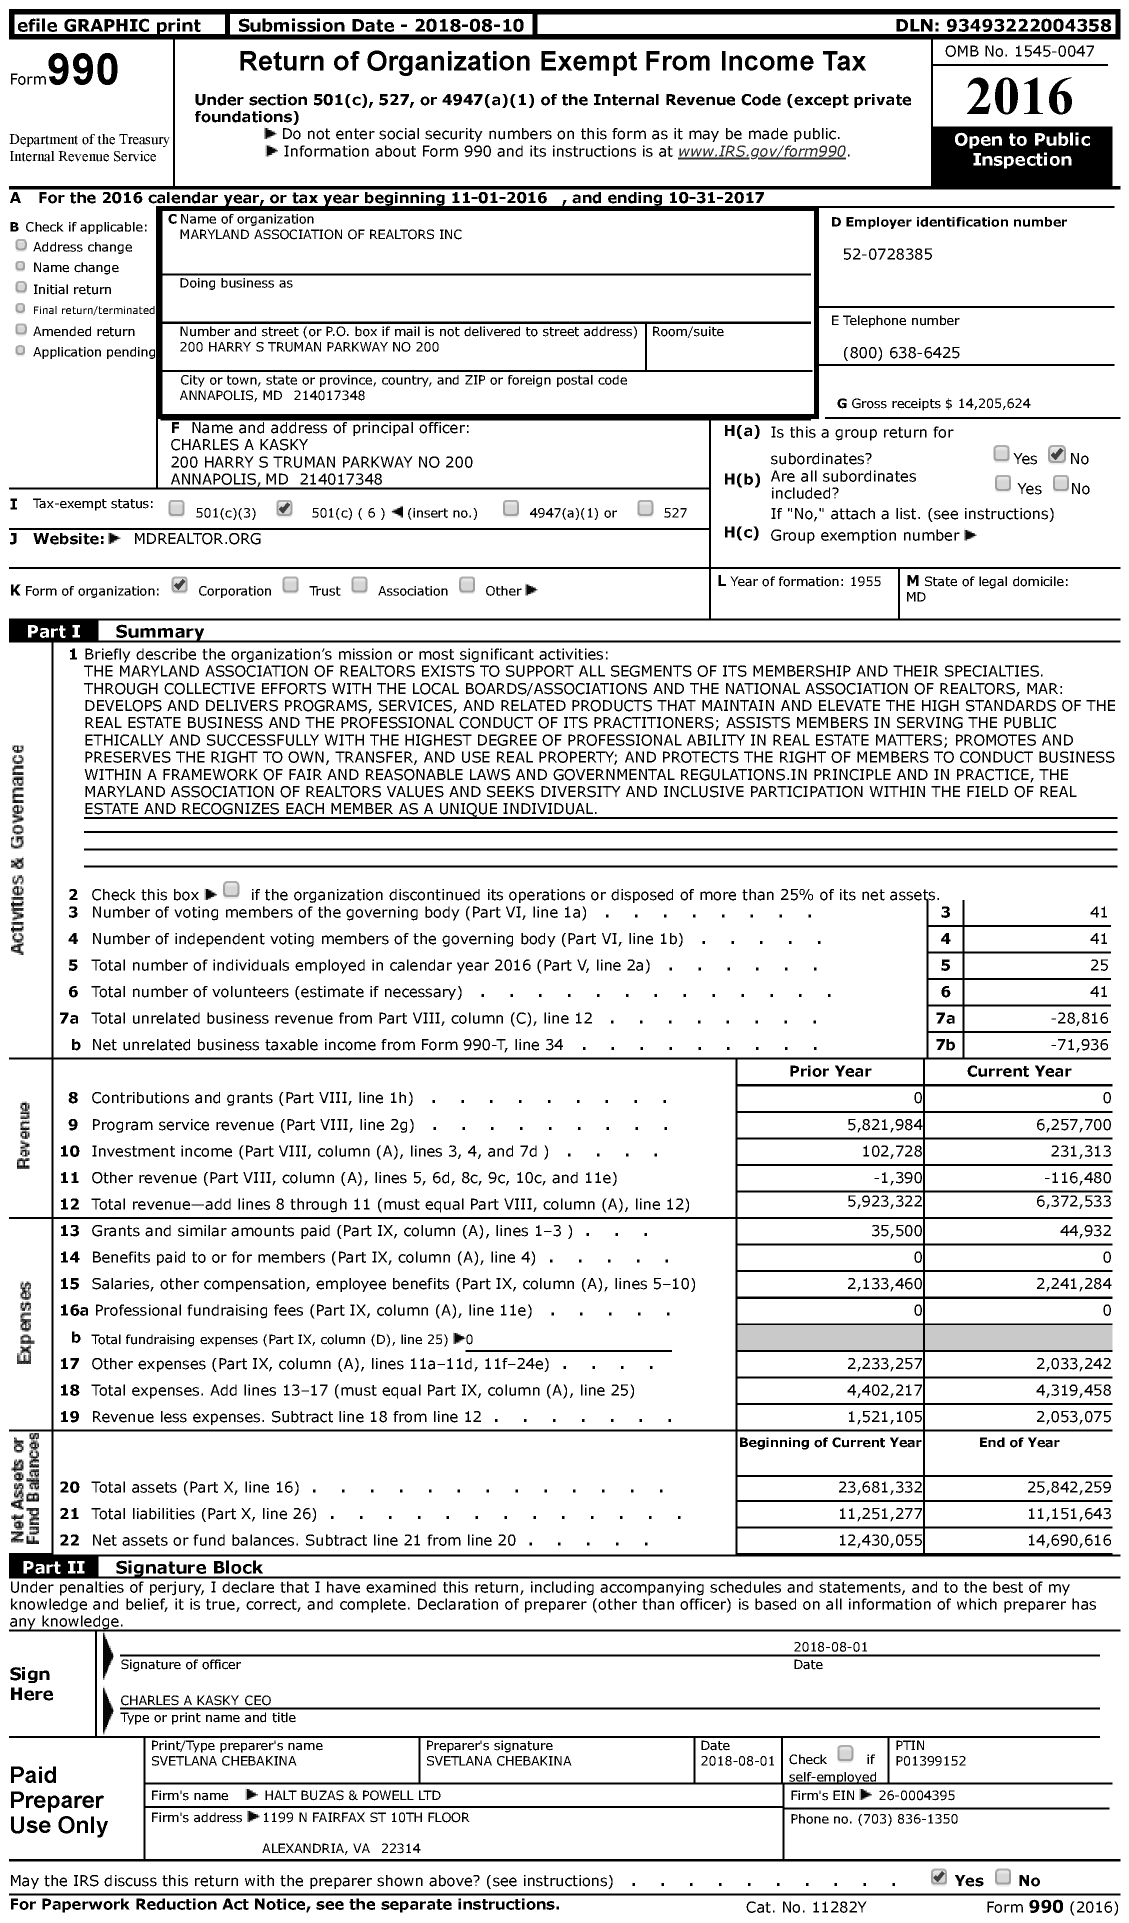 Image of first page of 2016 Form 990 for Maryland Association of Realtors (MAR)